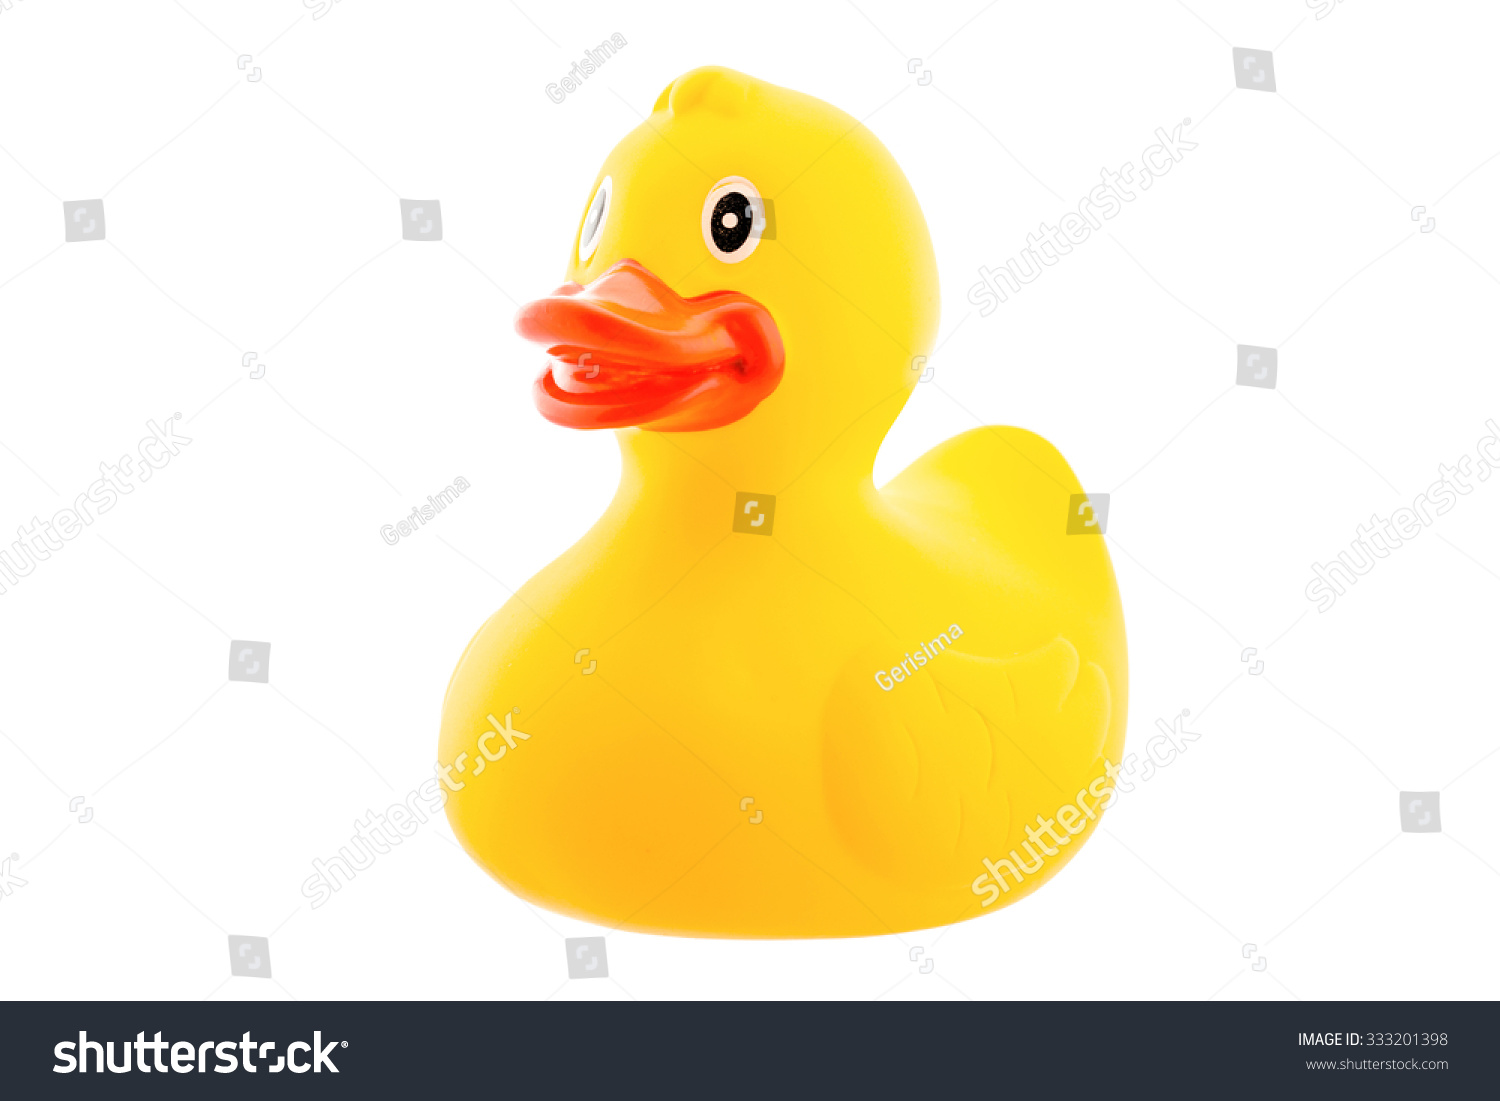 Yellow rubber duck isolated on white background #333201398